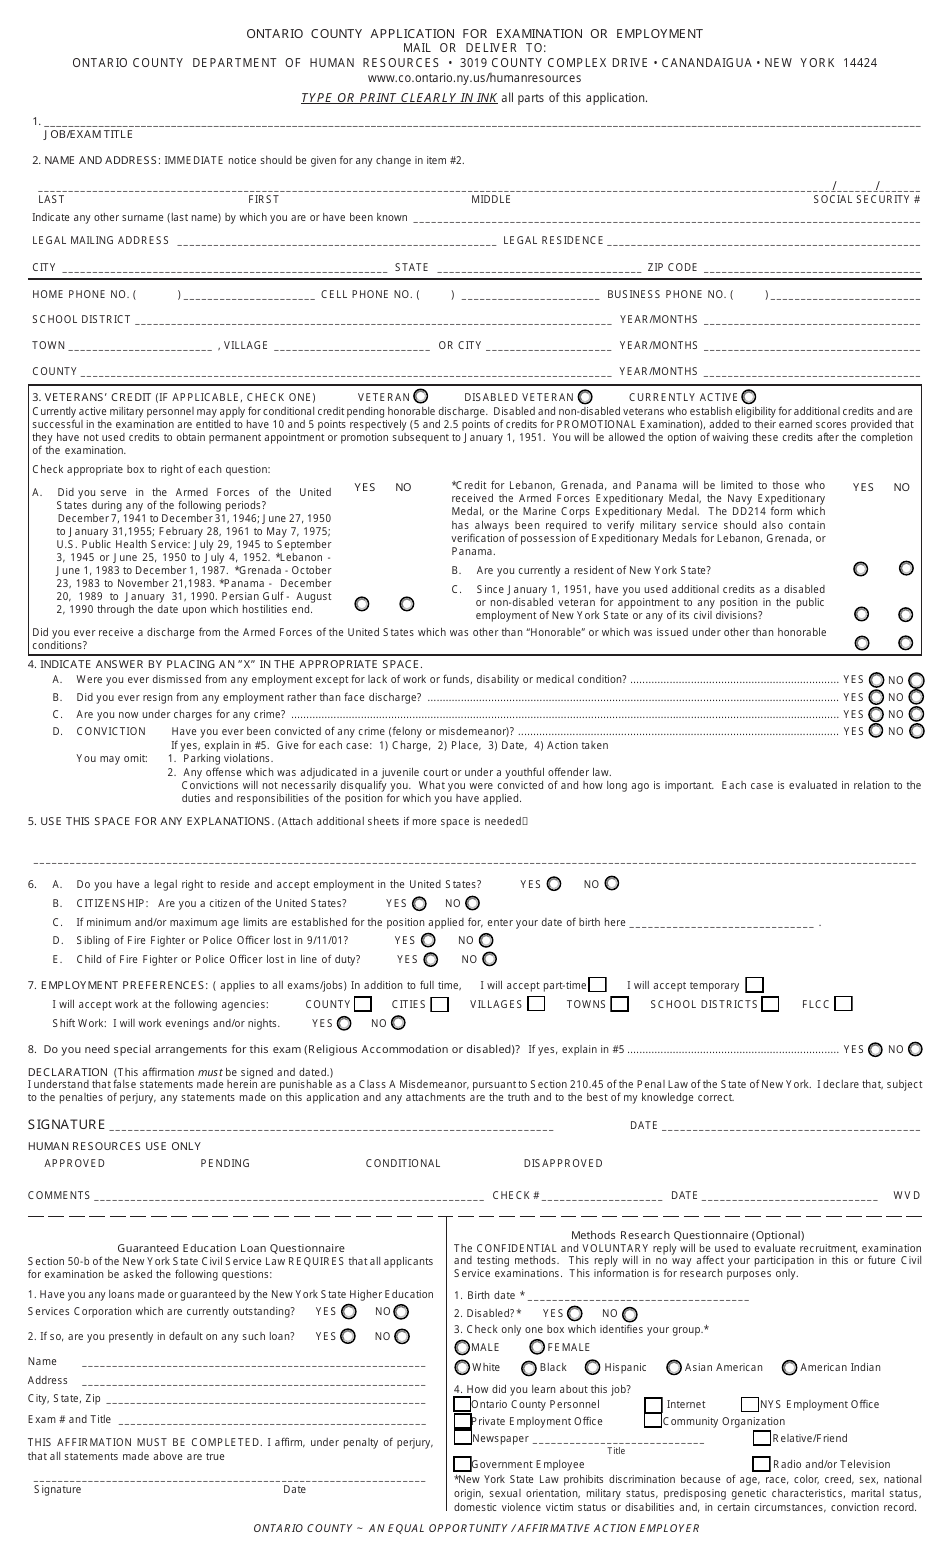 Application Form for Examination or Employment - Ontario County, New York, Page 1